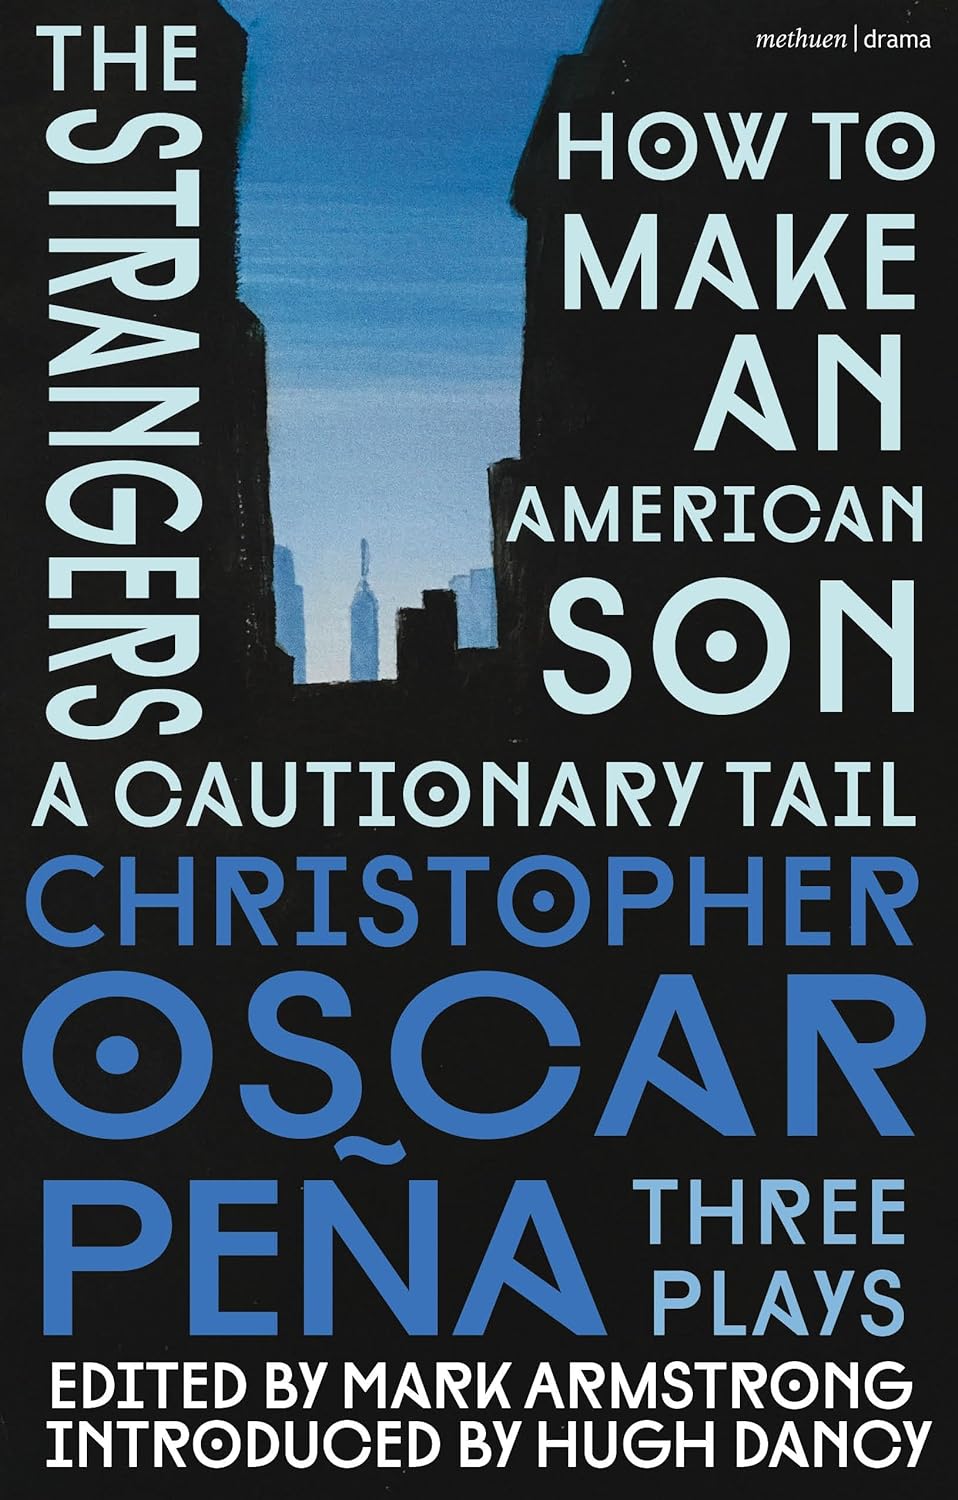 Christopher Oscar Peña: Three Plays: How To Make An American Son; The Strangers; A Cautionary Tail by Christopher Oscar Peña